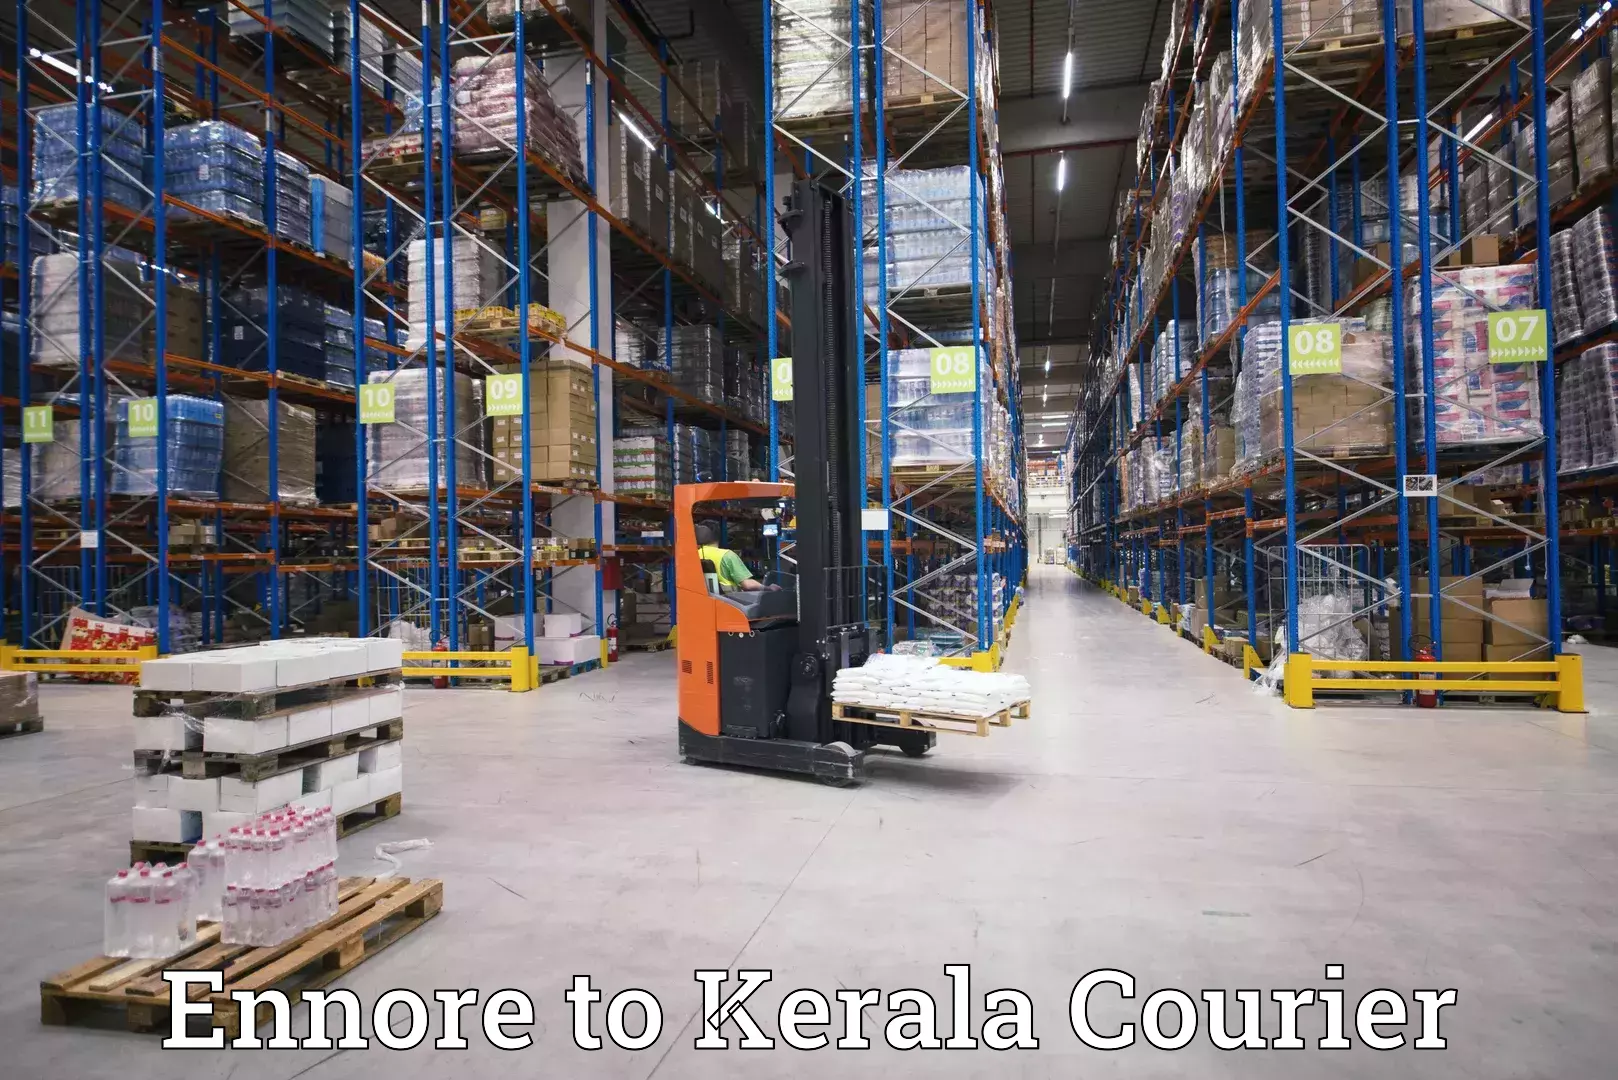 Courier service innovation Ennore to Cochin Port Kochi